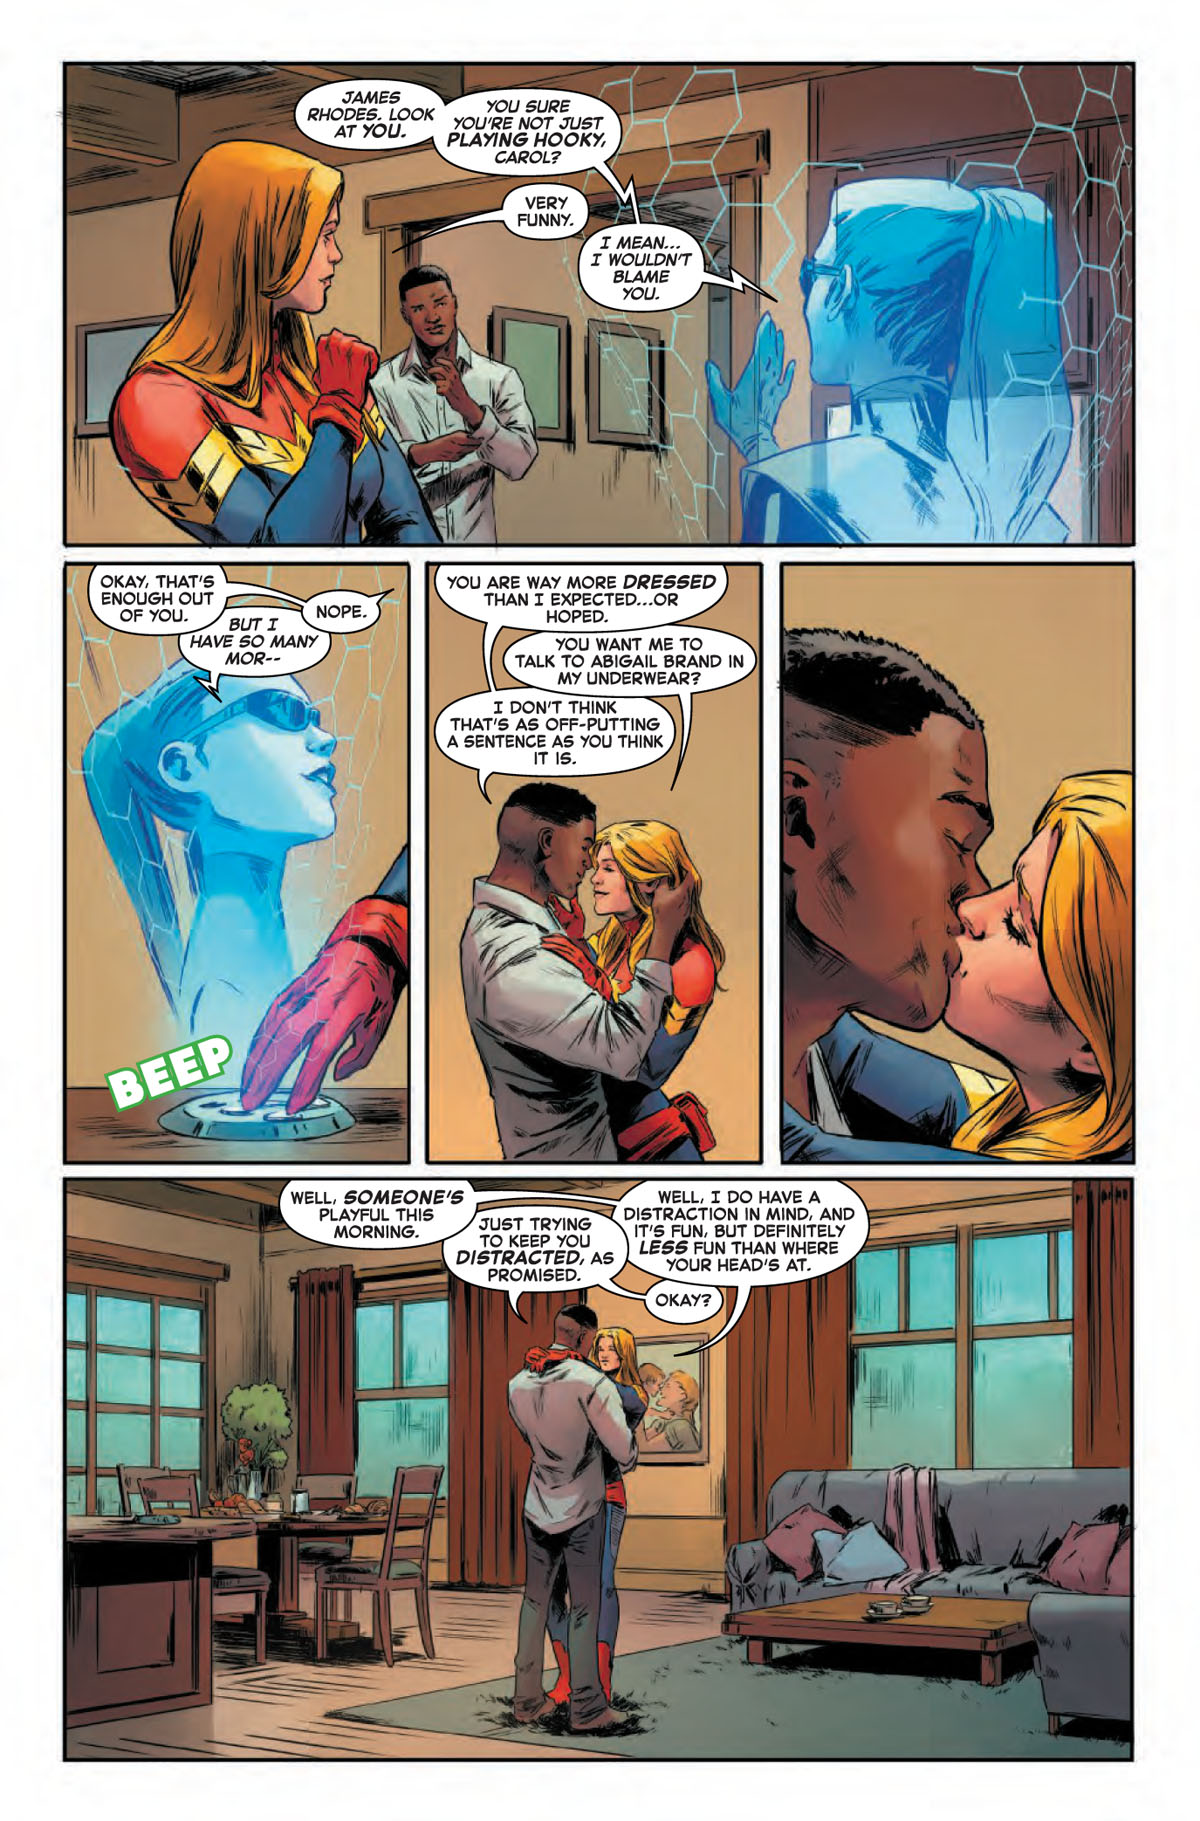 Captain Marvel #9 page 2